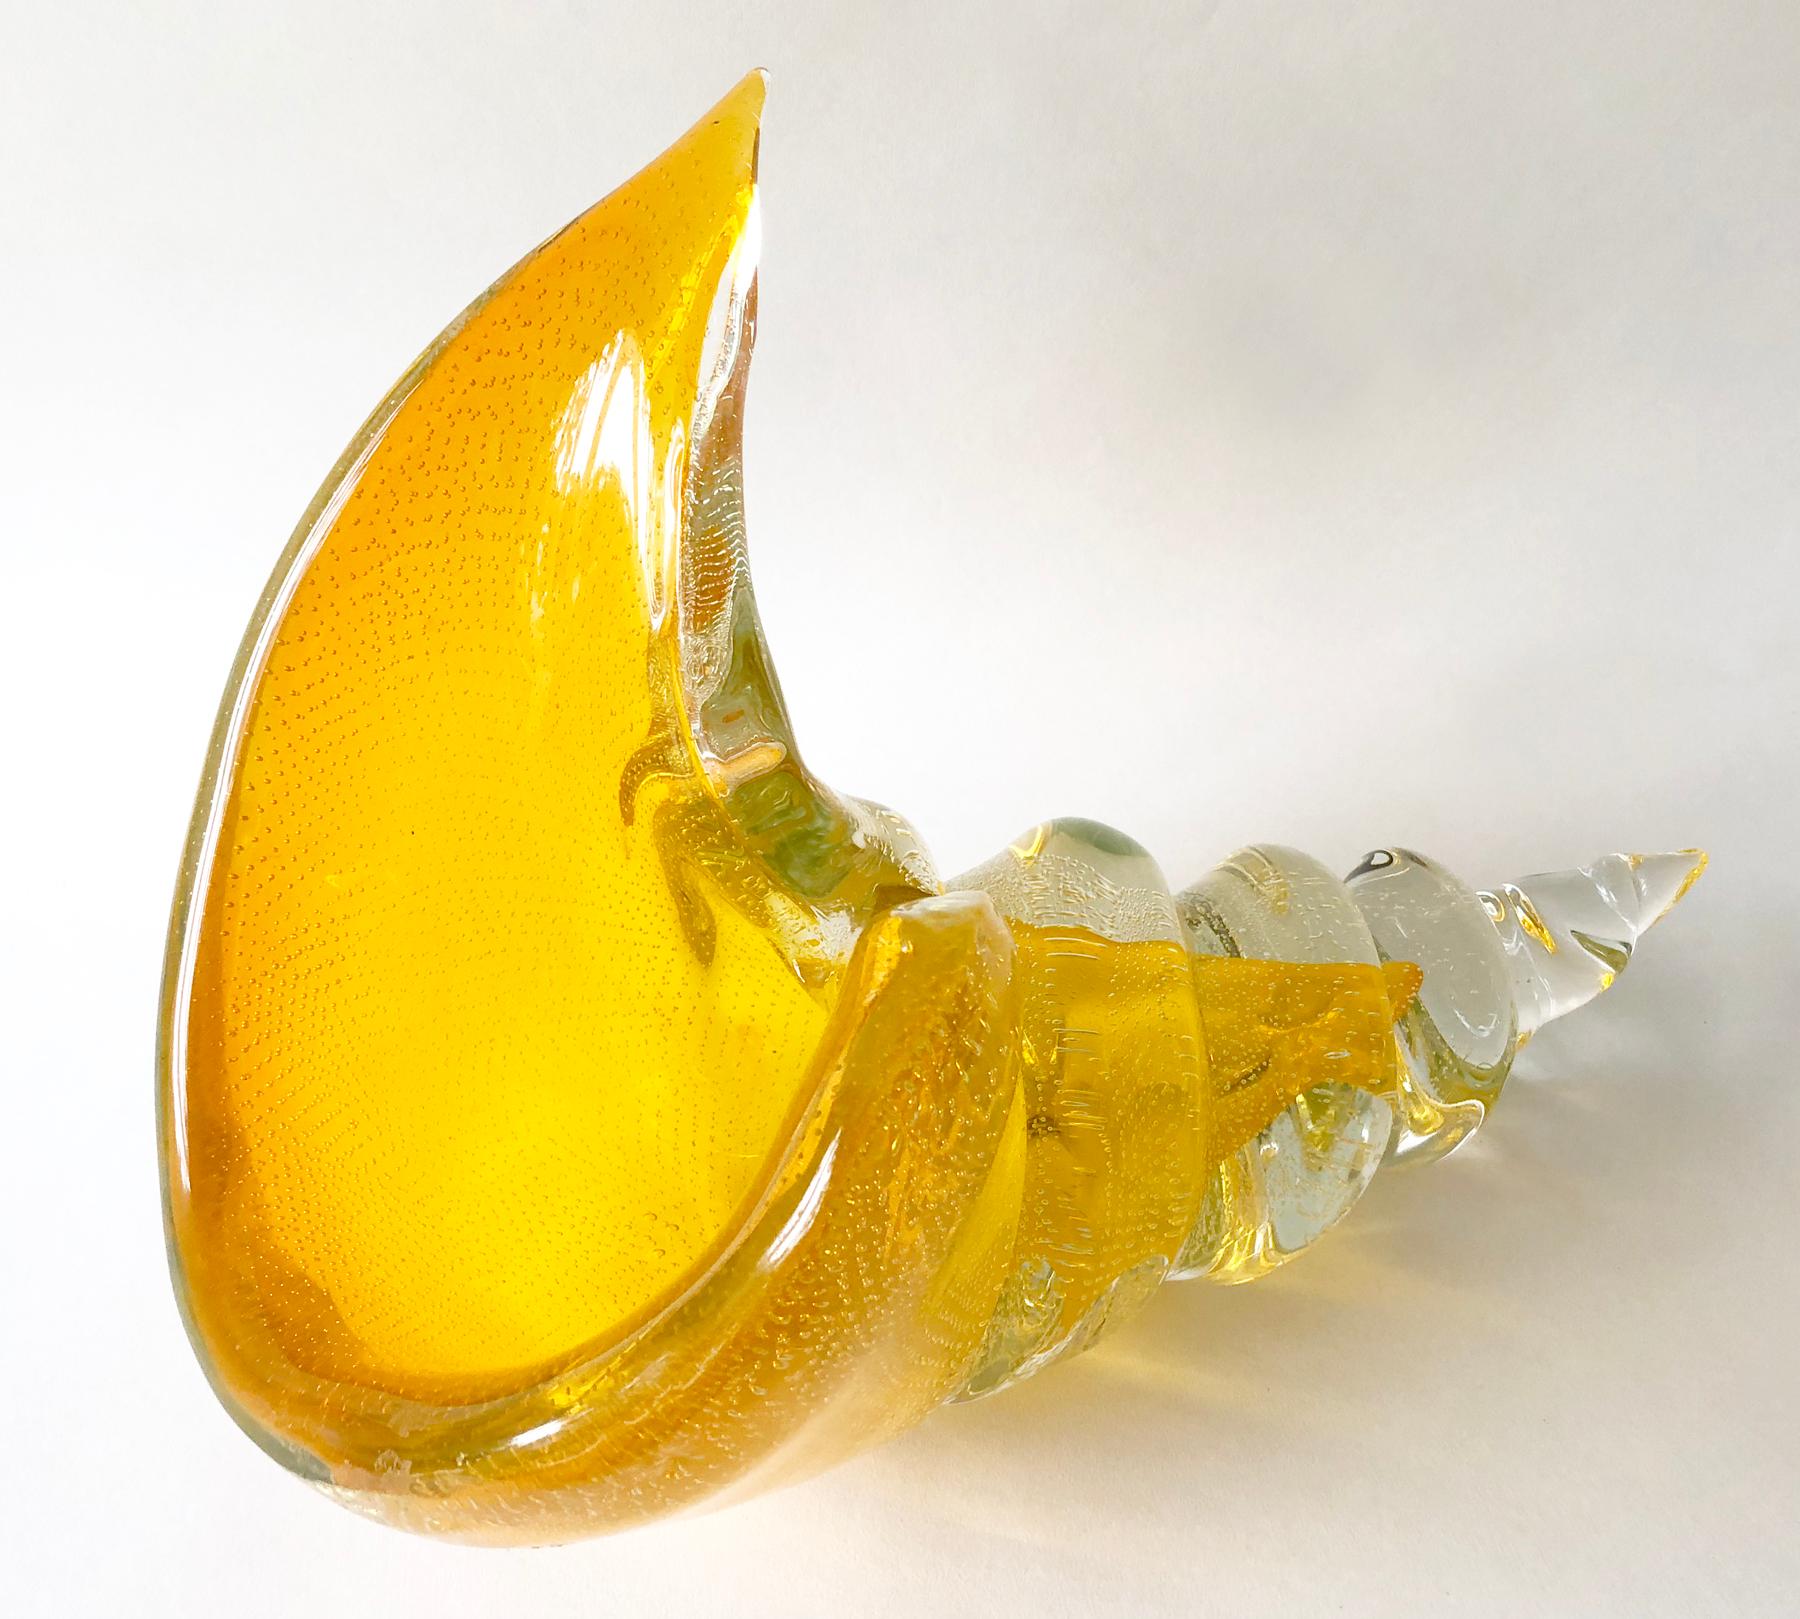 Large scale bright orange cornucopia, horn of plenty with bullicante controlled bubbles created by Barbini of Murano, Italy. Piece measures 10.5